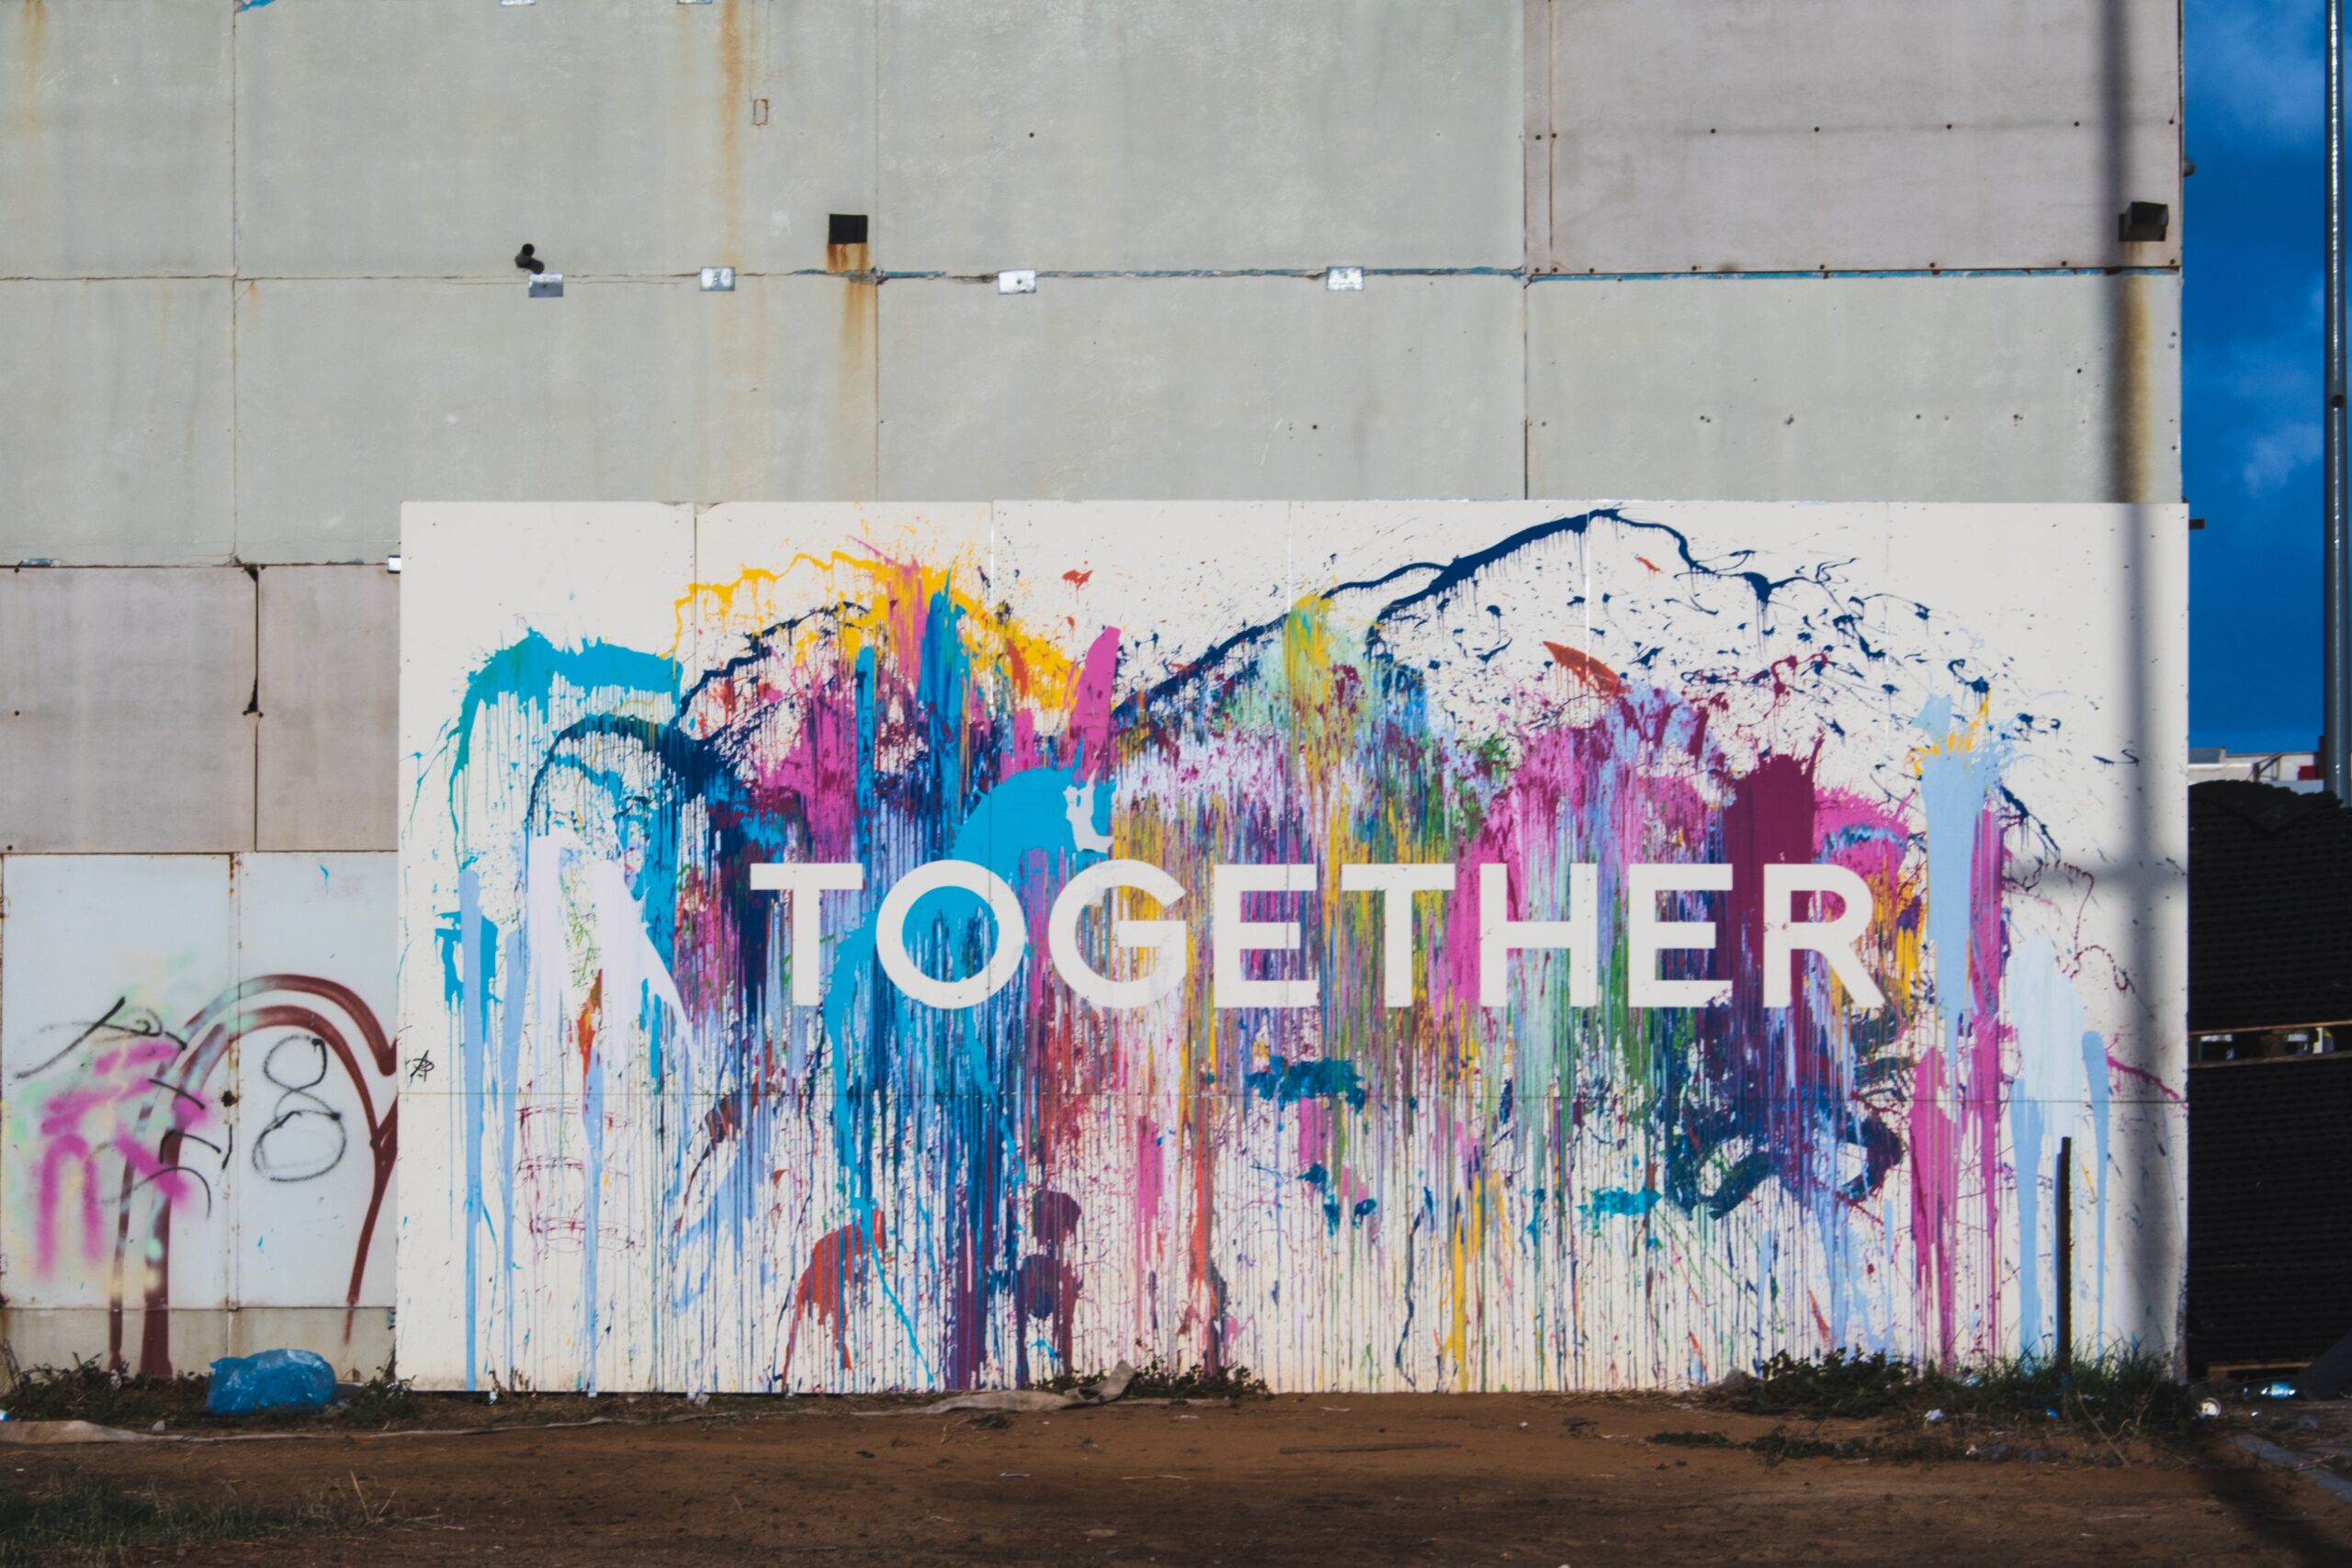 Art that says, "TOGETHER"